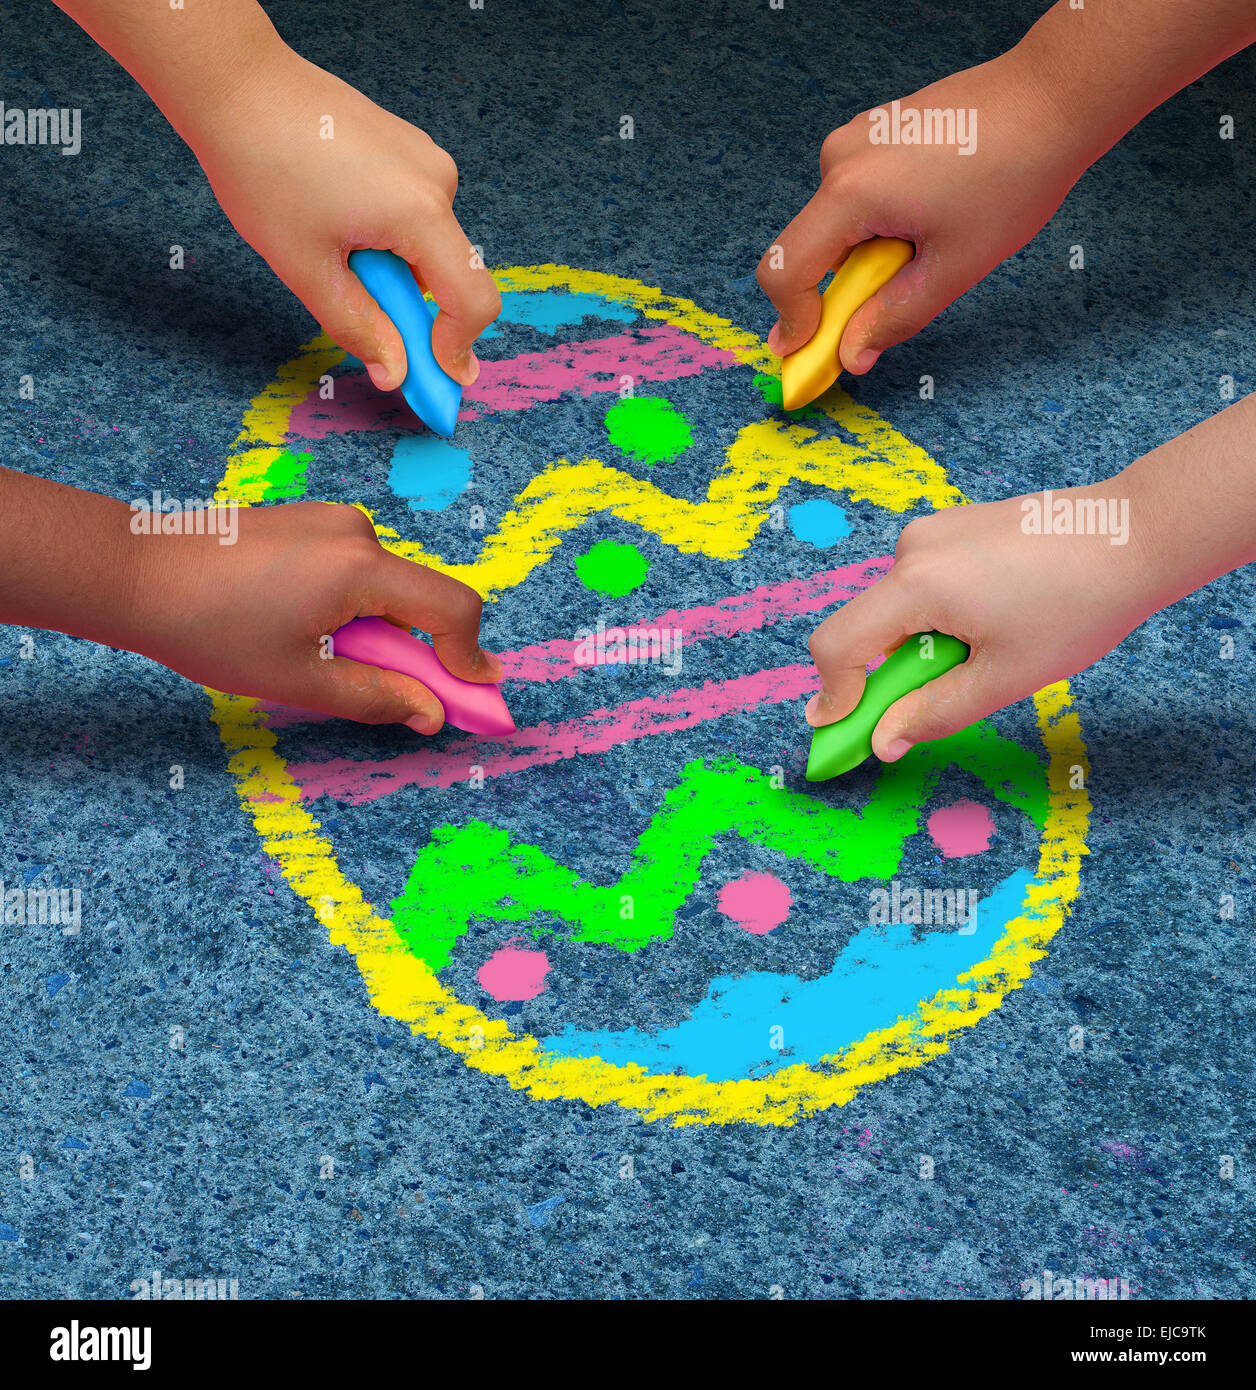 Easter arts and crafts concept as a group of children with chalk drawing a decorated egg on an asphalt texture as a symbol for cooperation and fun seasonal activities for kids. Stock Photo